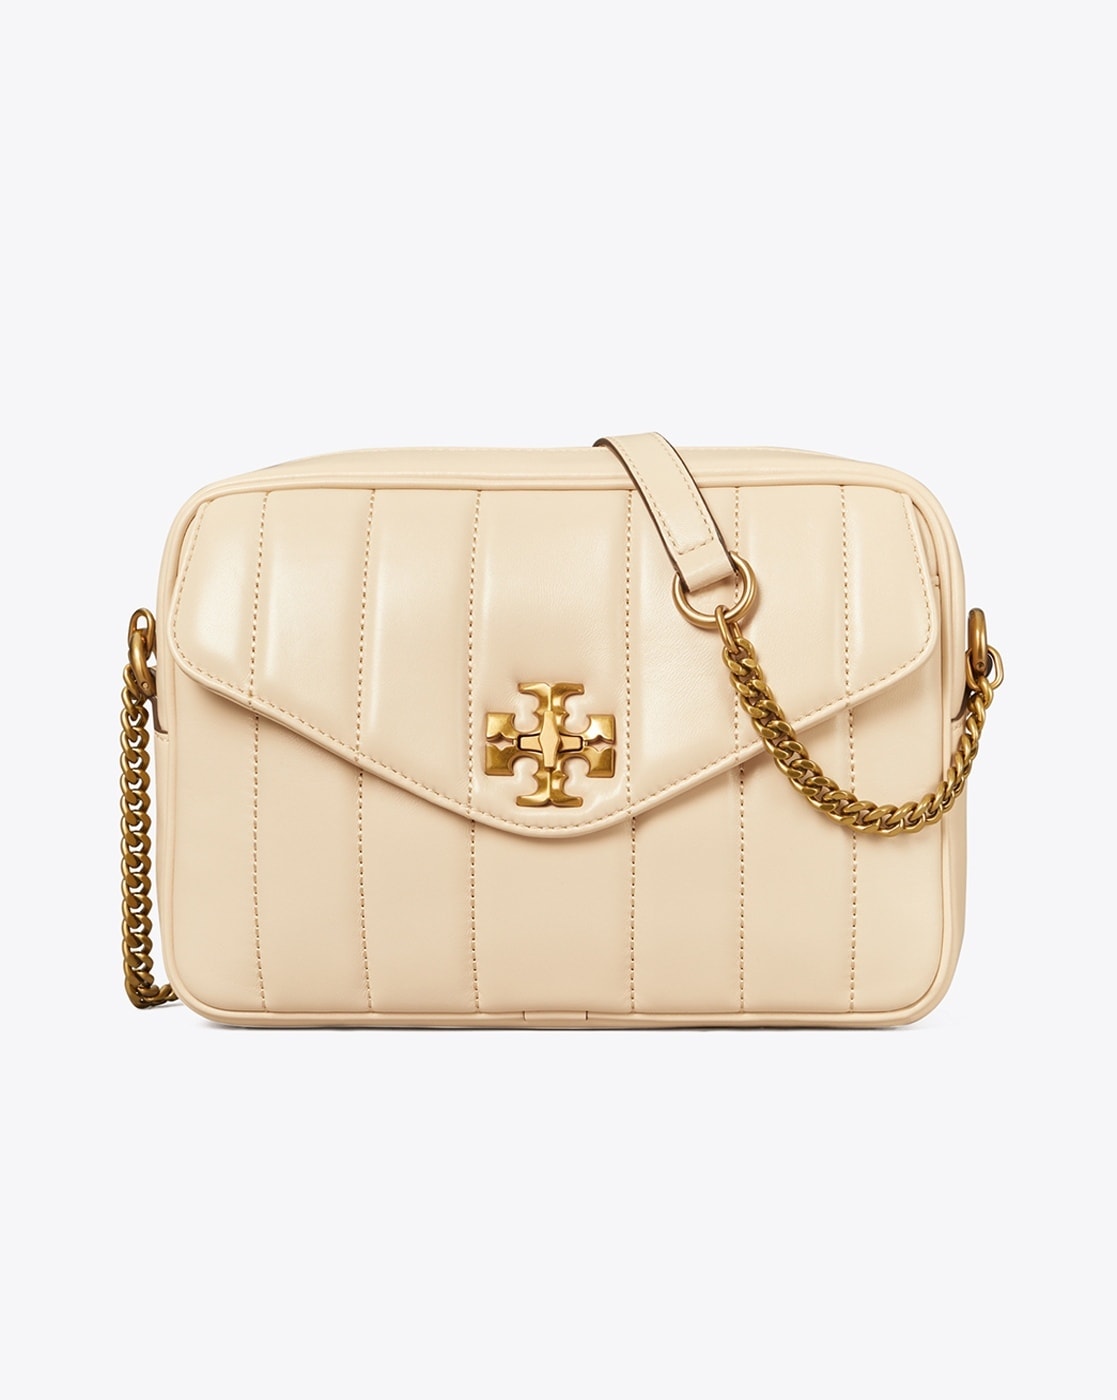 Buy Tory Burch Women Bags Online in India Up to 50% Off